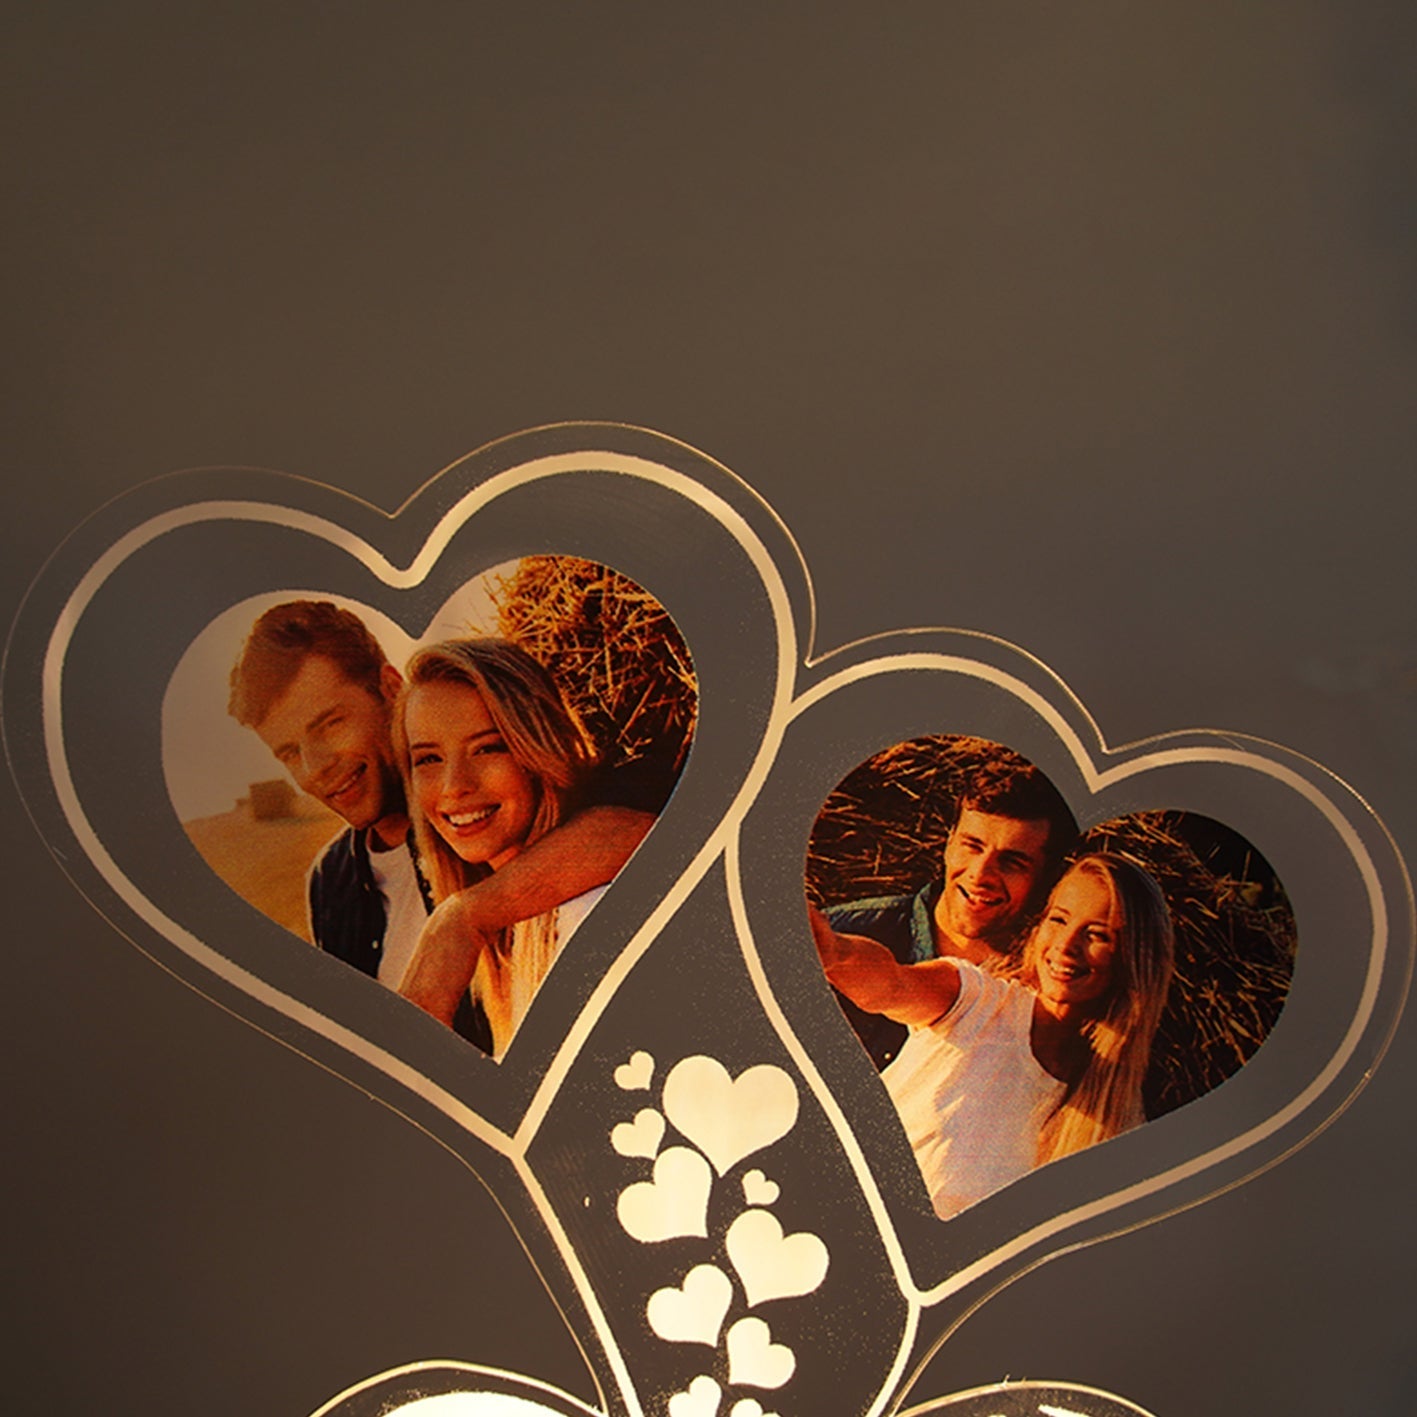 ThinkEngraved custom light Personalized Photo Collage and Names Infinity Hearts - Couples Gift